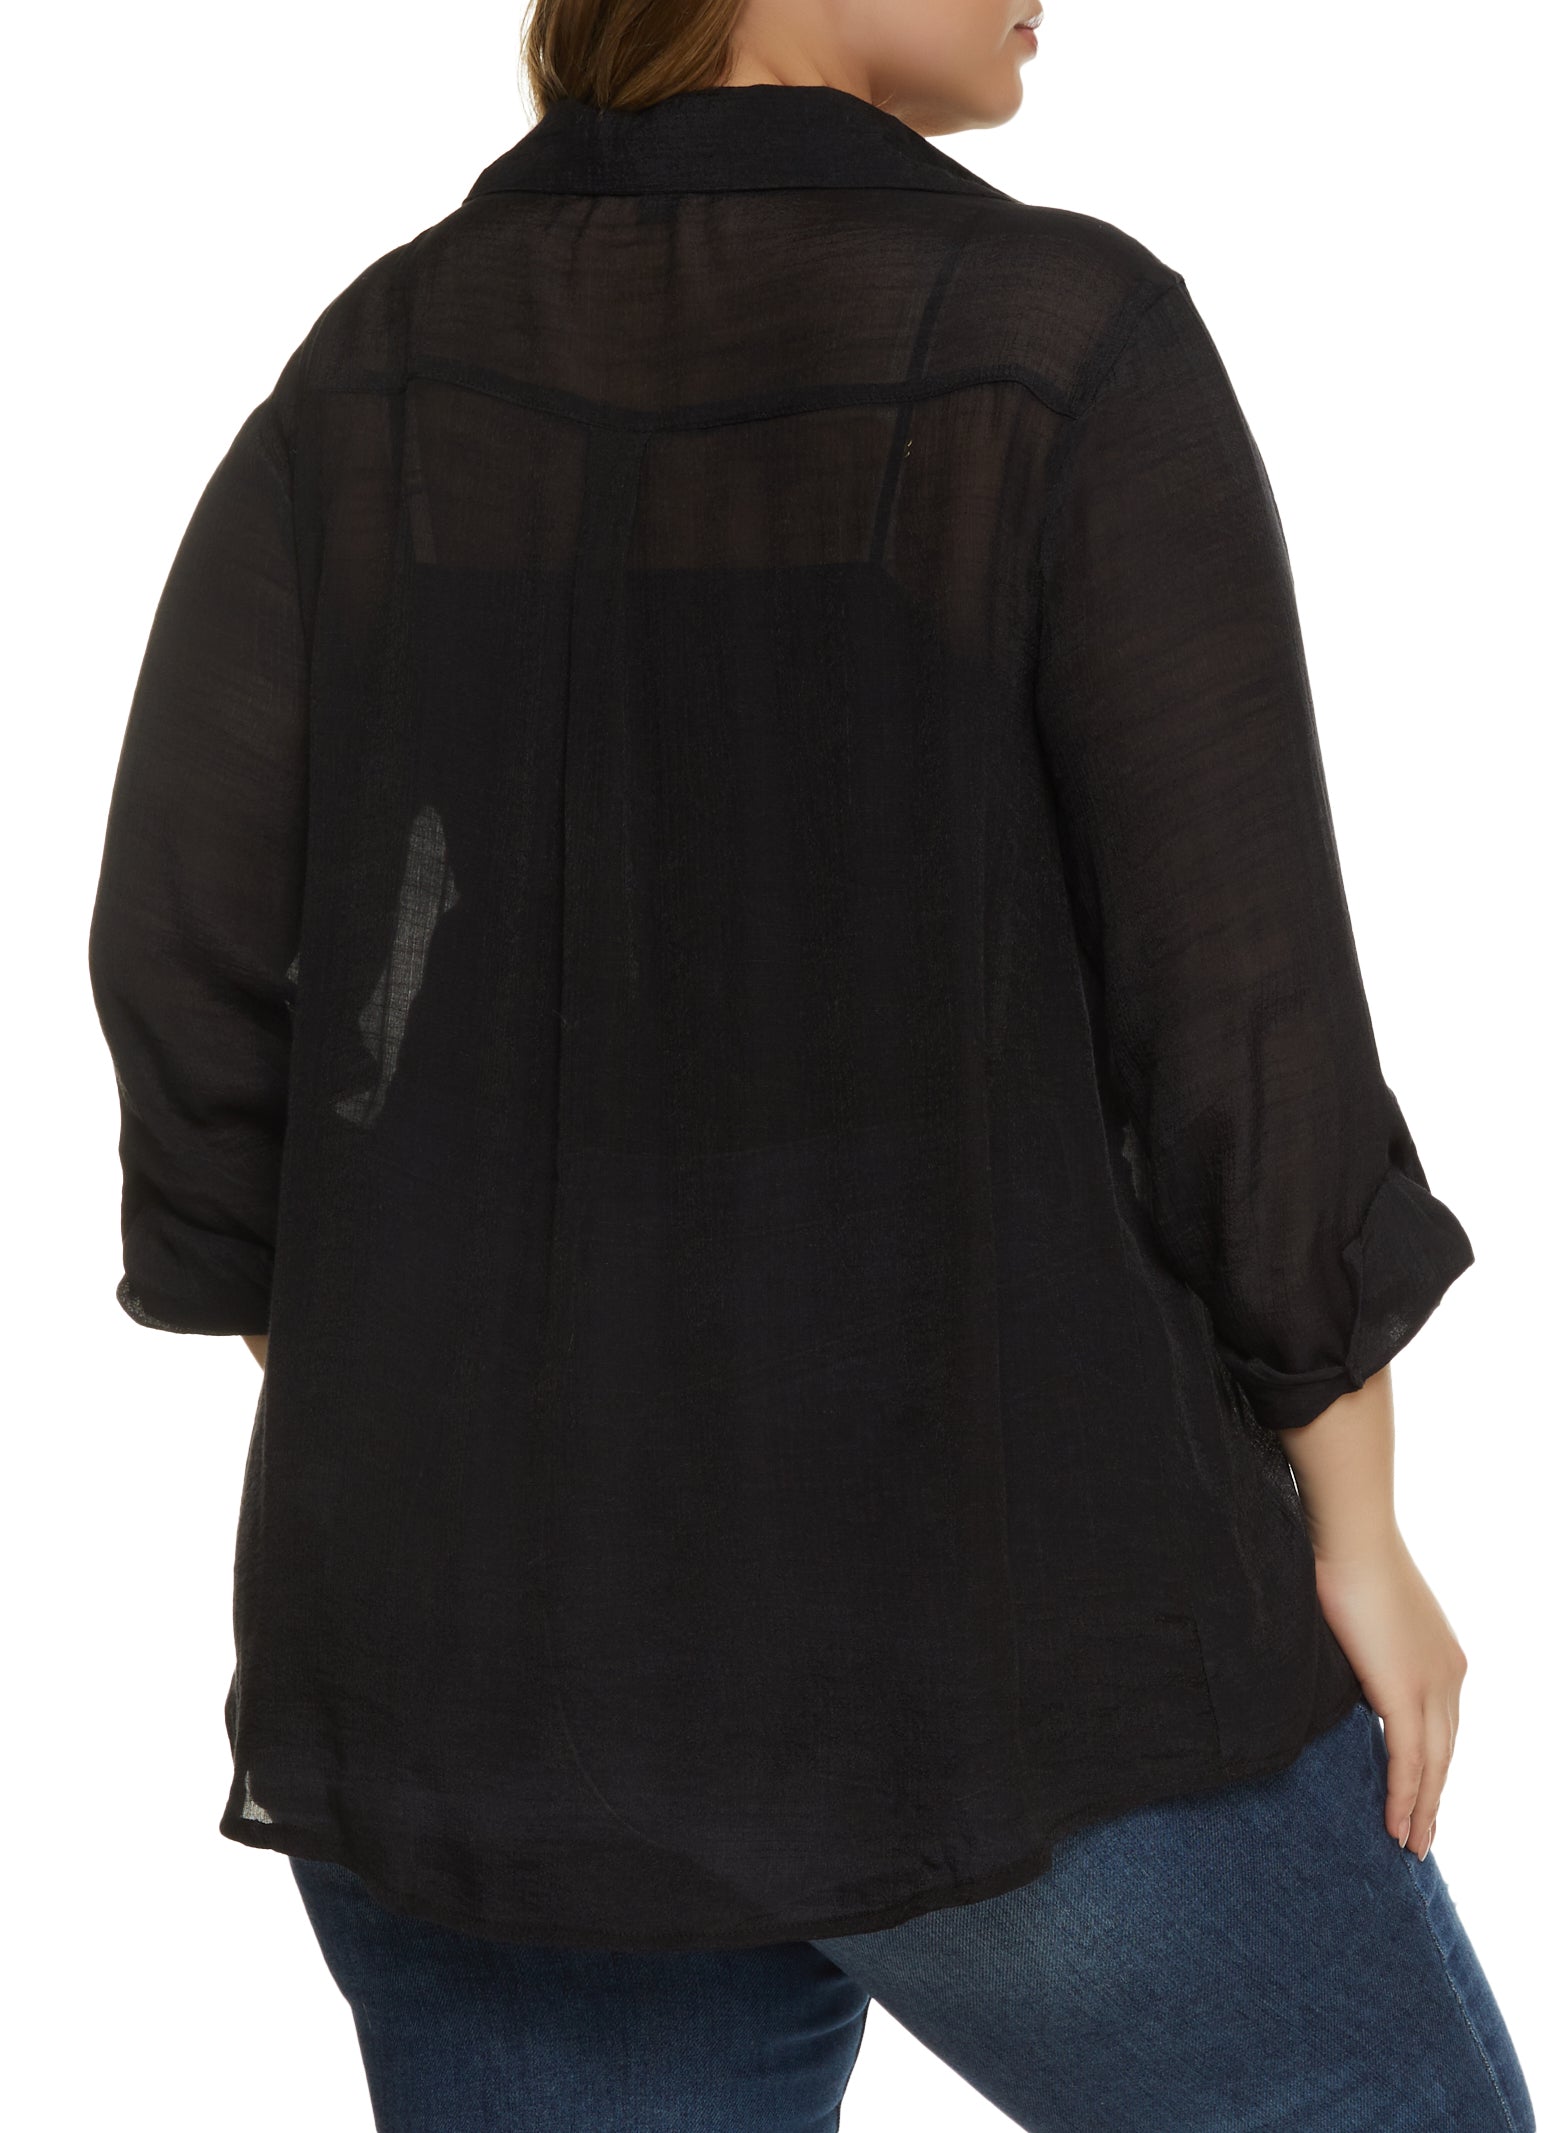 Jm Collection Plus Printed Chiffon-Sleeve Embellished-Neck Top, Created for  Macy's